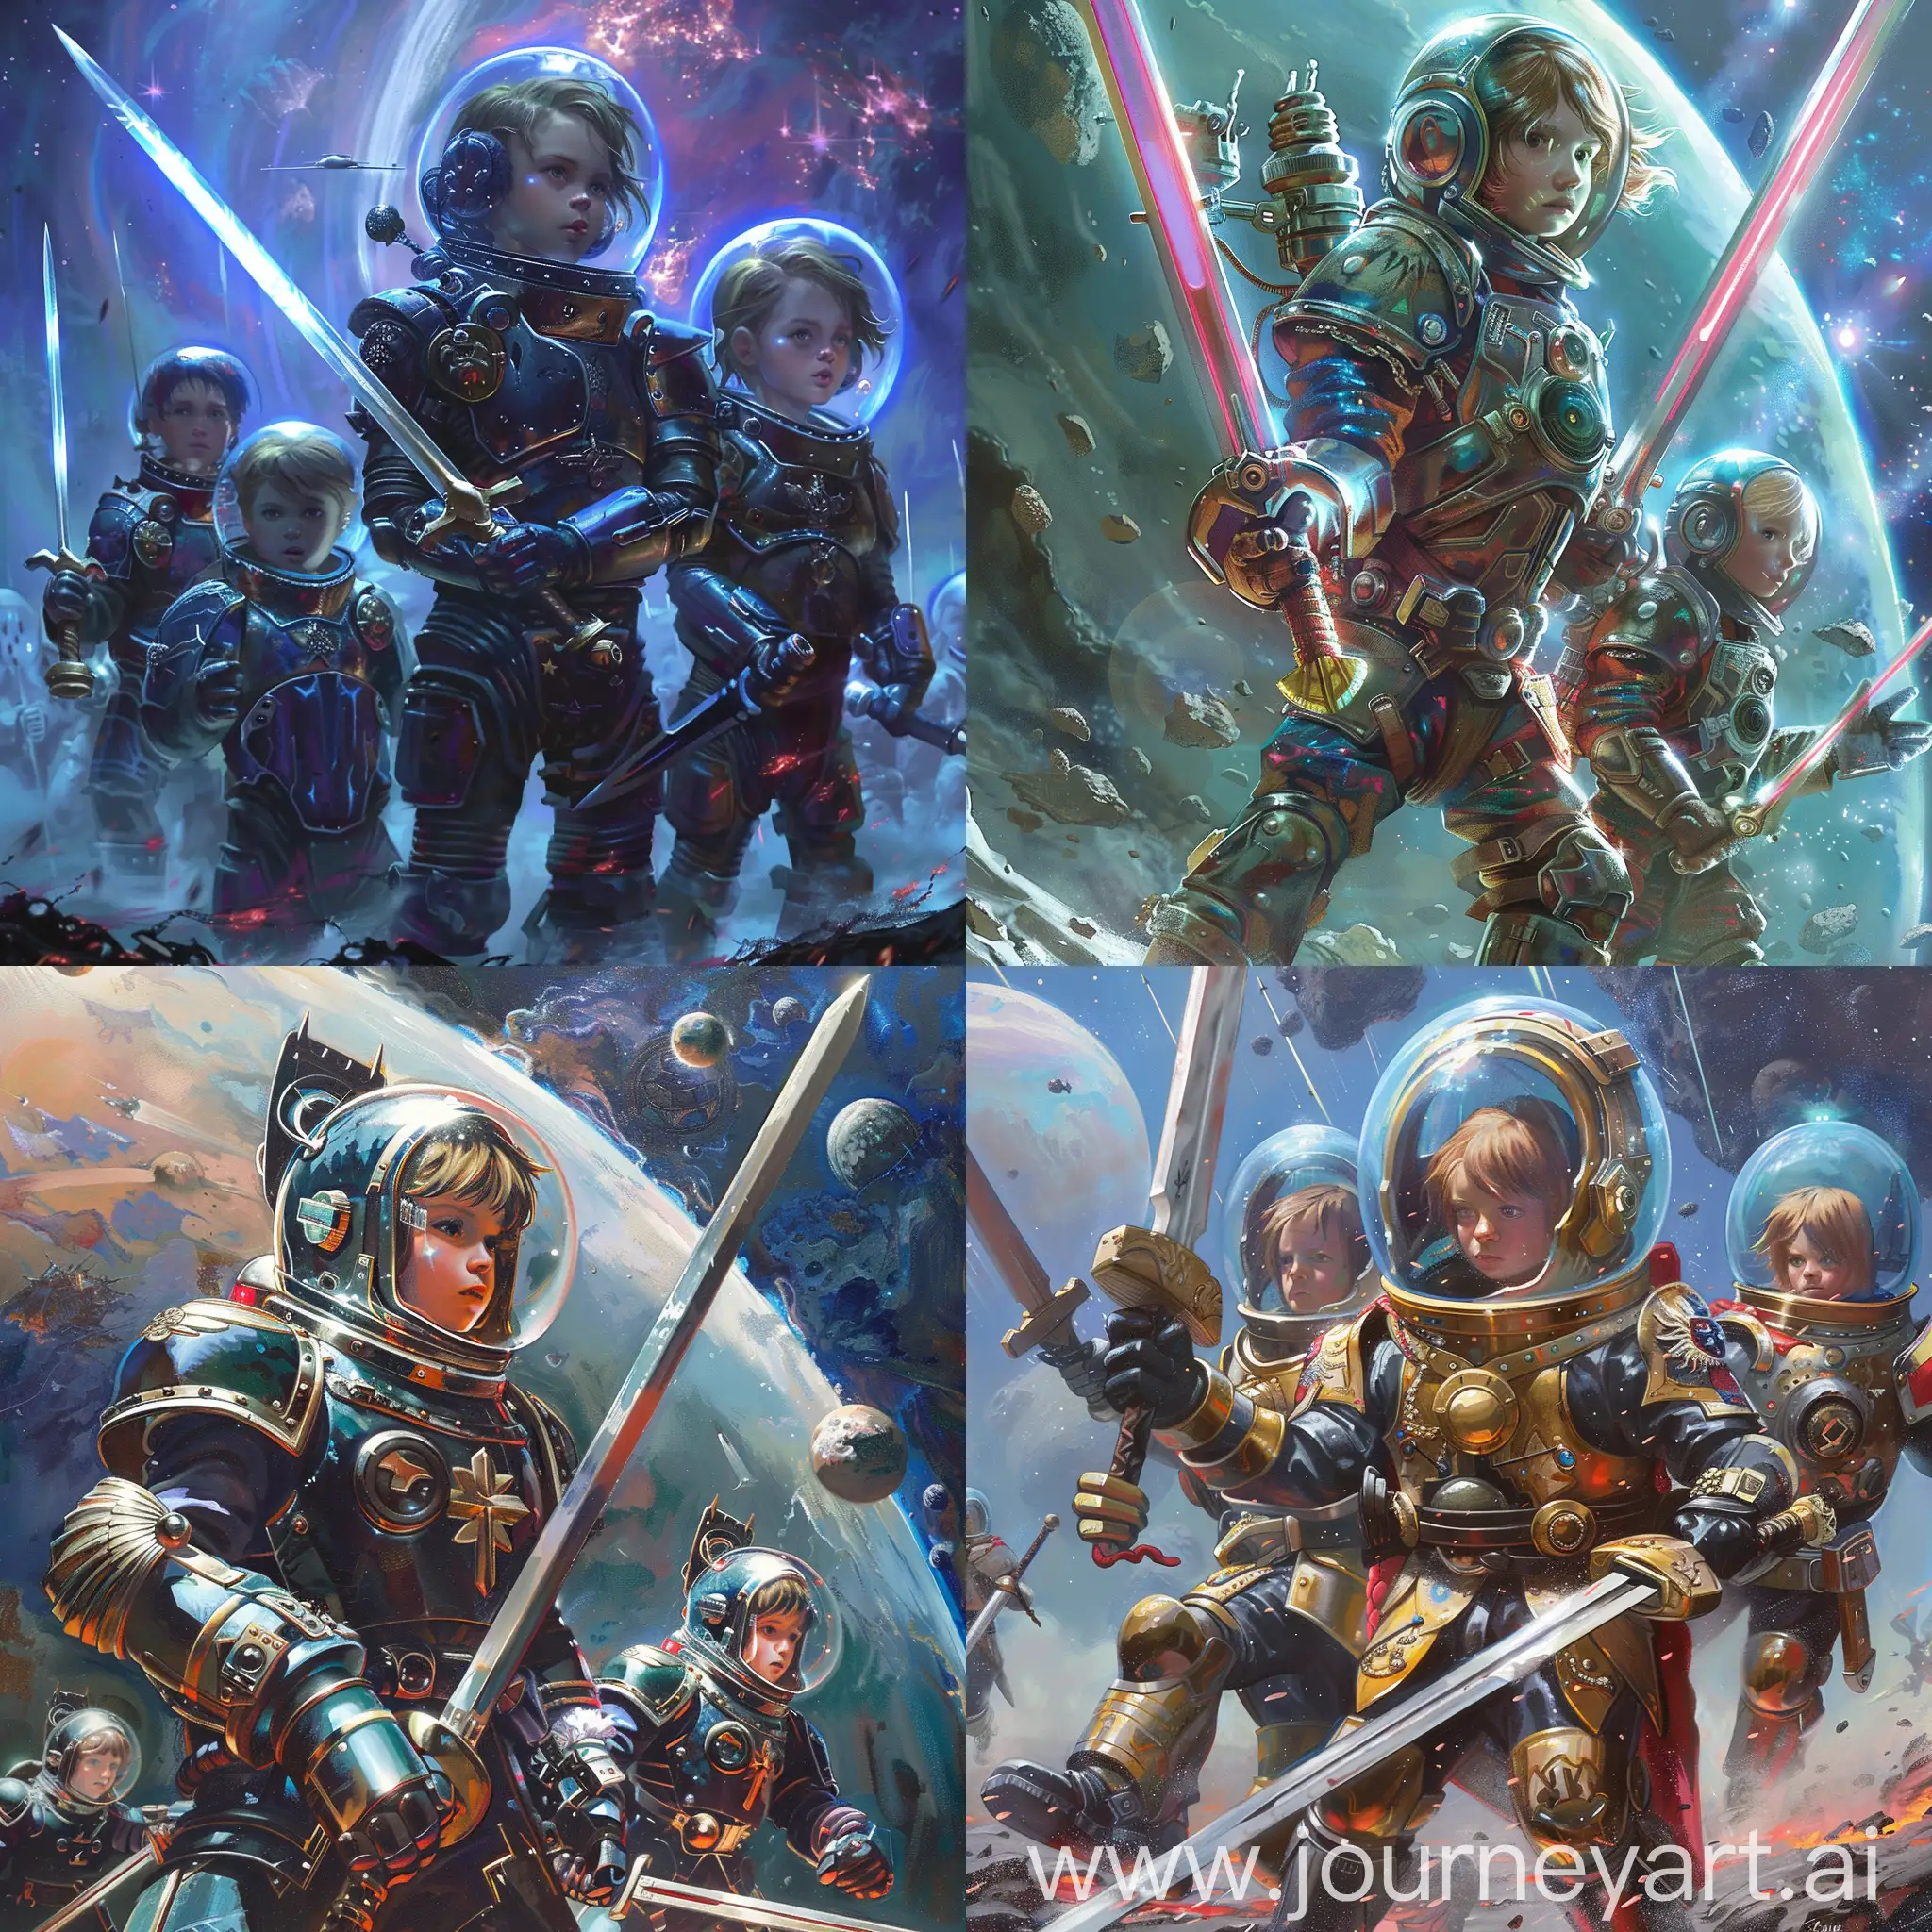 Adventurous-Children-Knights-in-Space-Armor-with-Swords